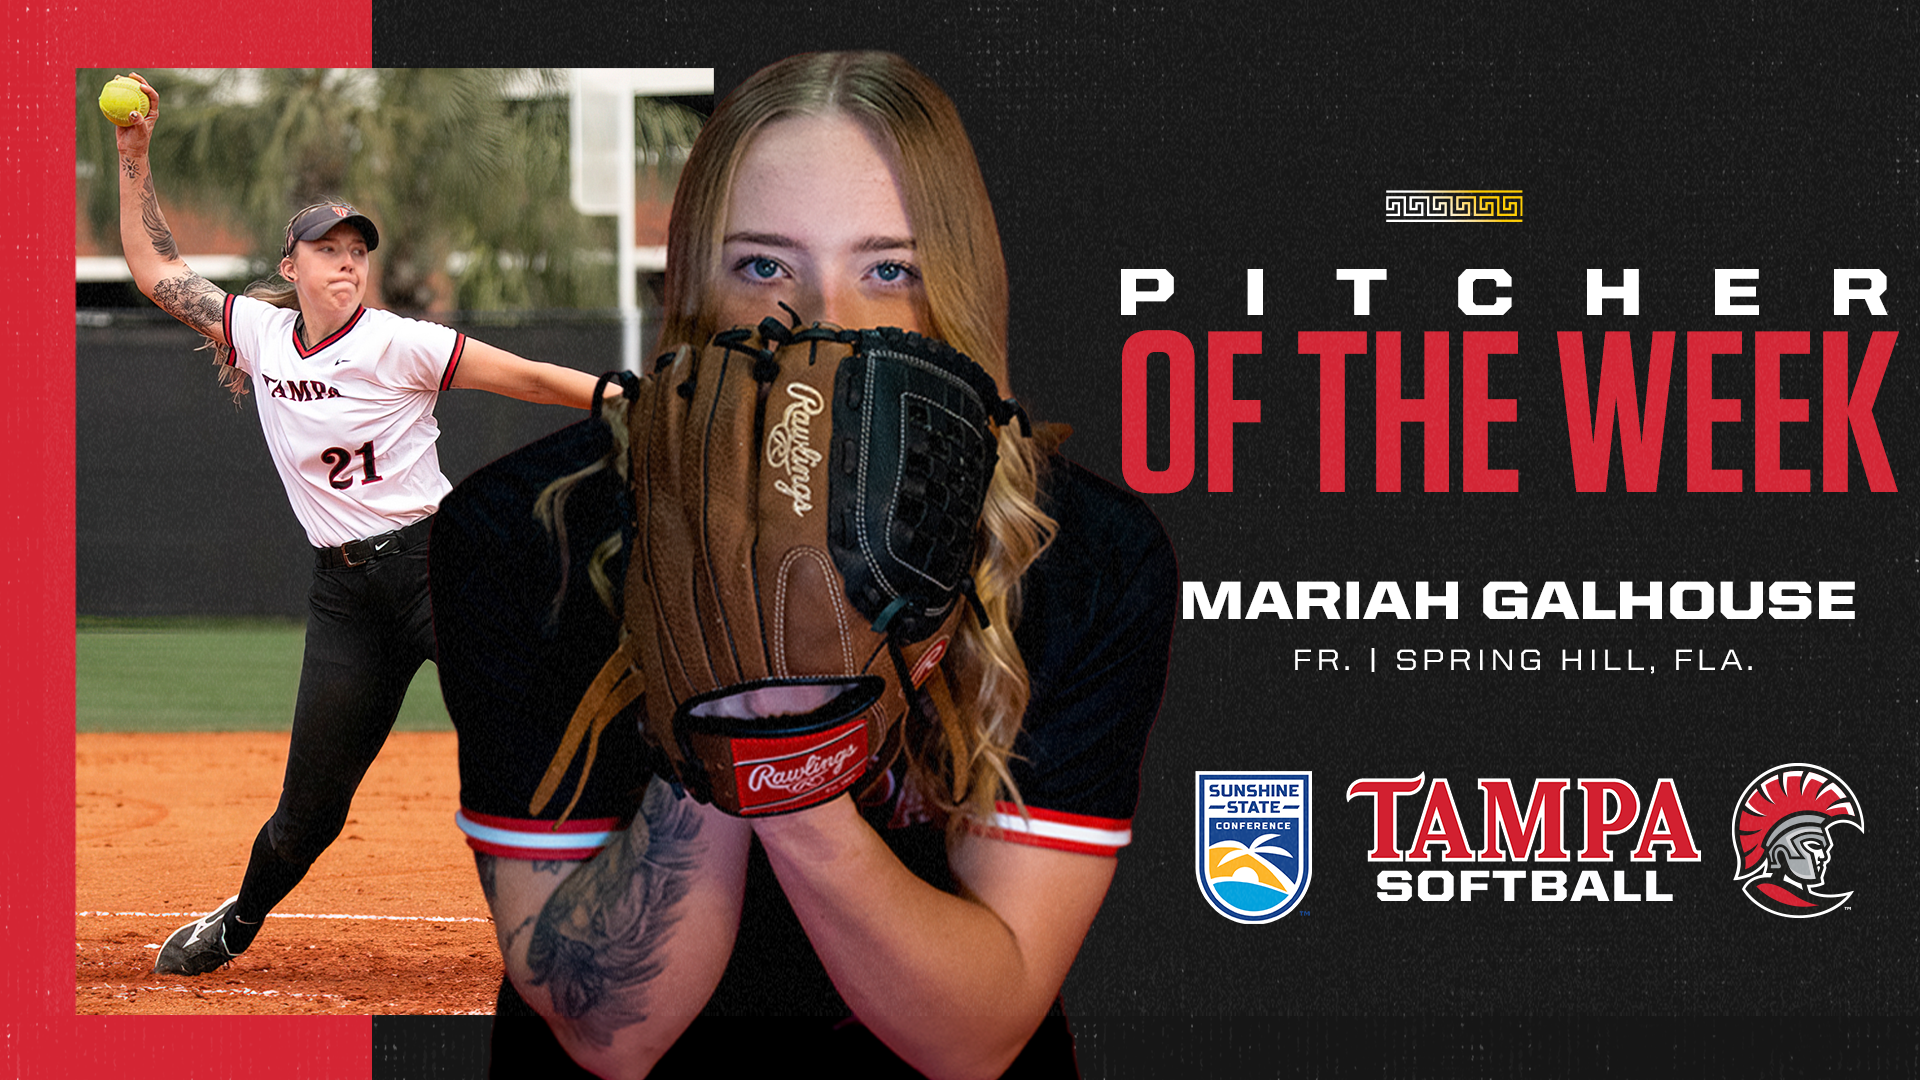 Galhouse Secures SSC Pitcher of the Week